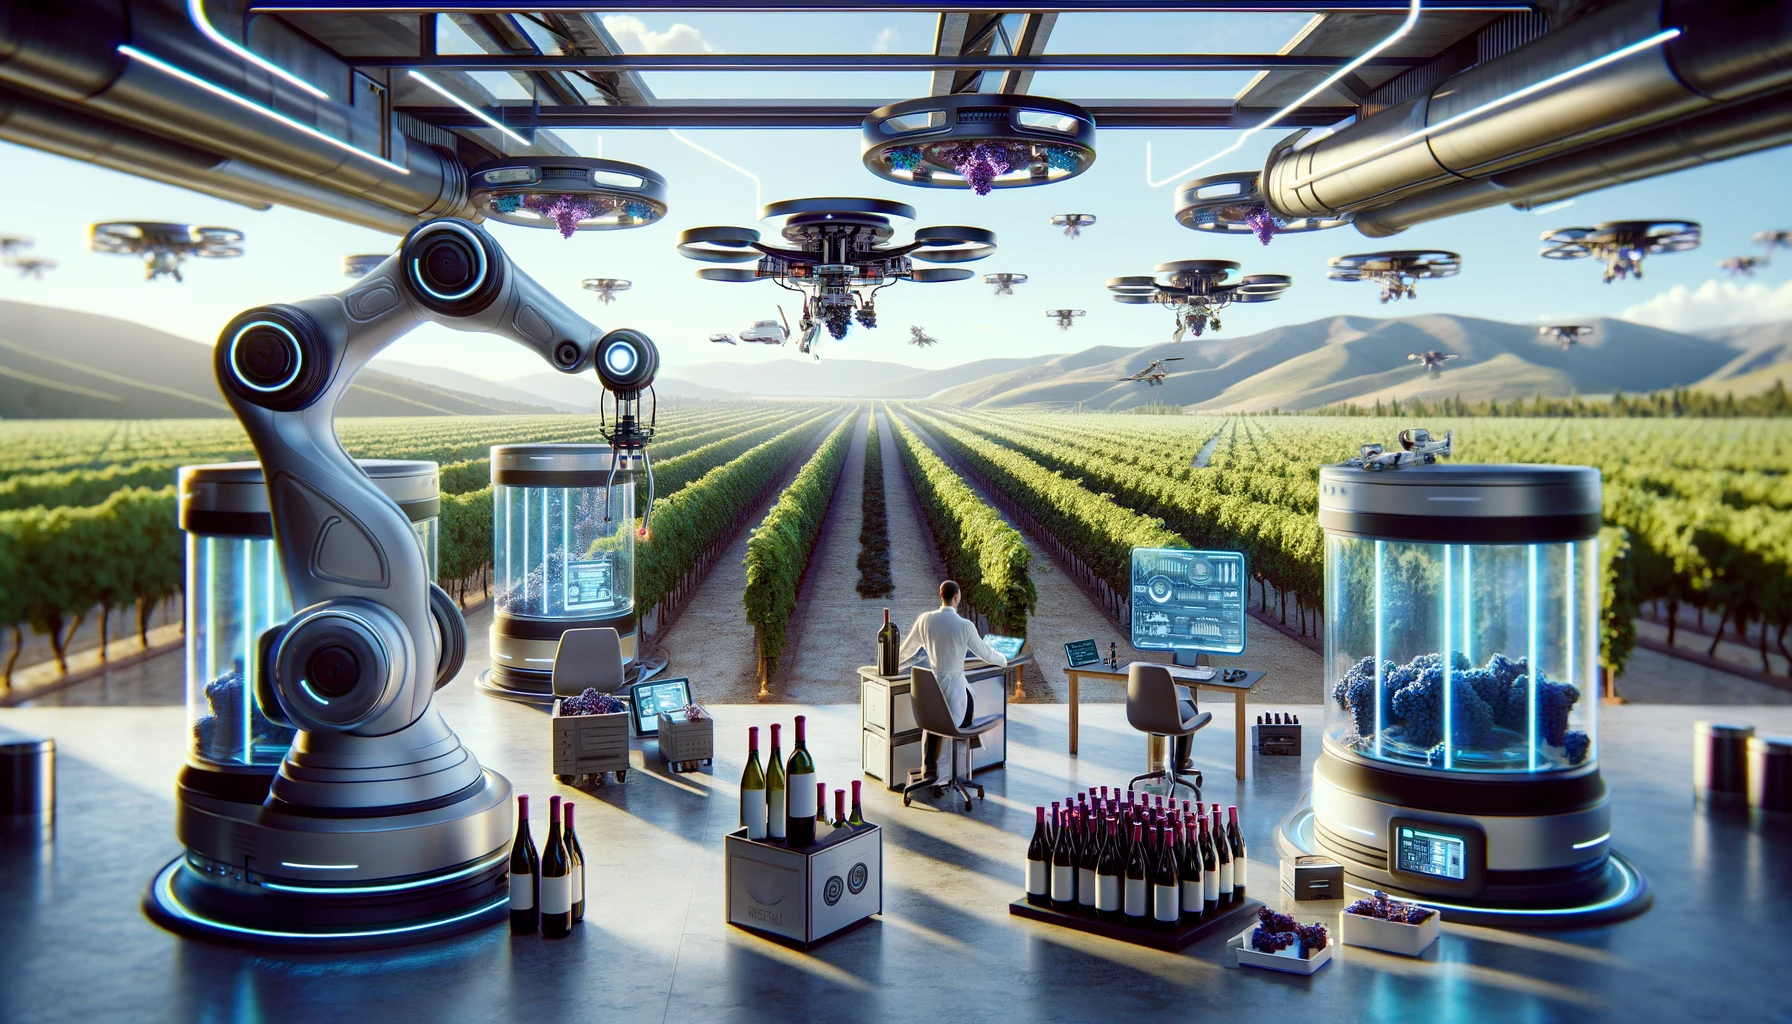 The future of wine technology presents both opportunities and challenges.